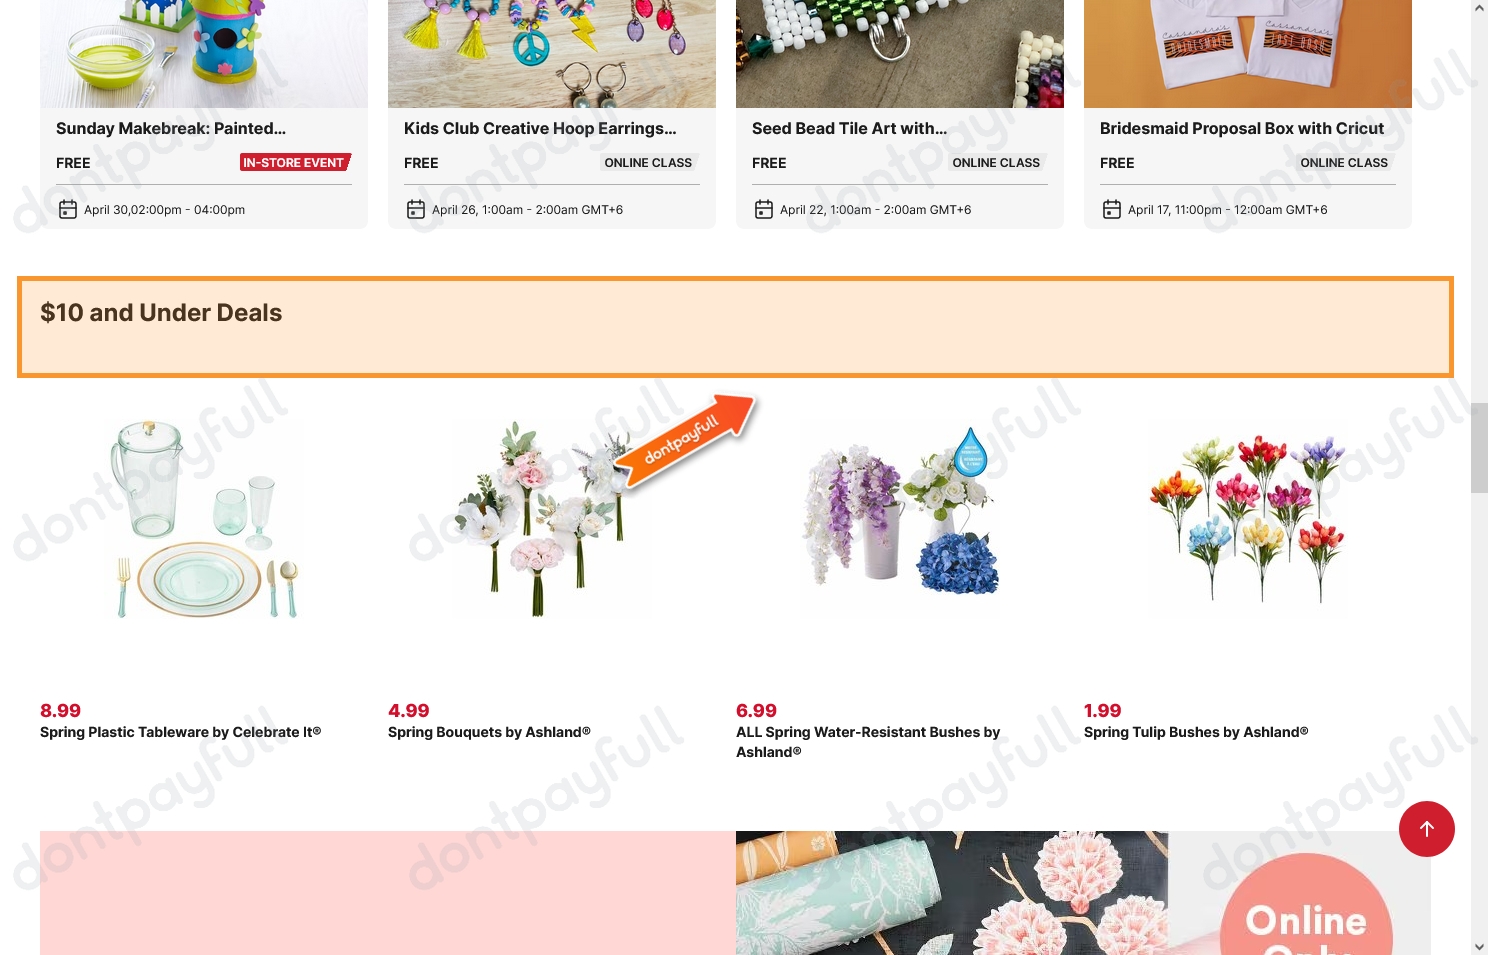 Pinned December 22nd: 50% off a single item at Michaels #coupon via The  Coupons App